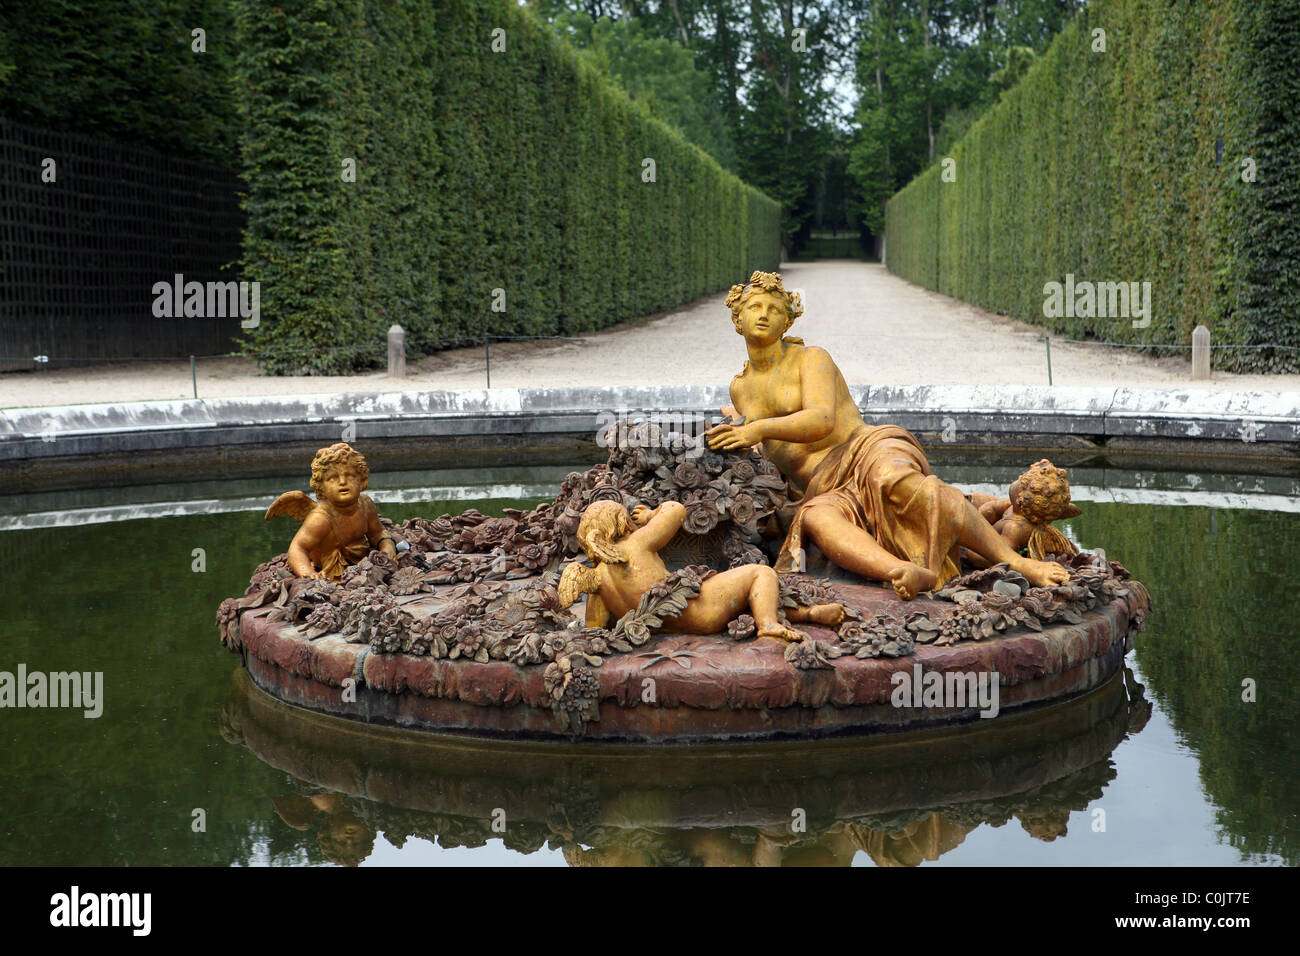 Scenes from the gardens of the Palace of Versailles France Stock Photo